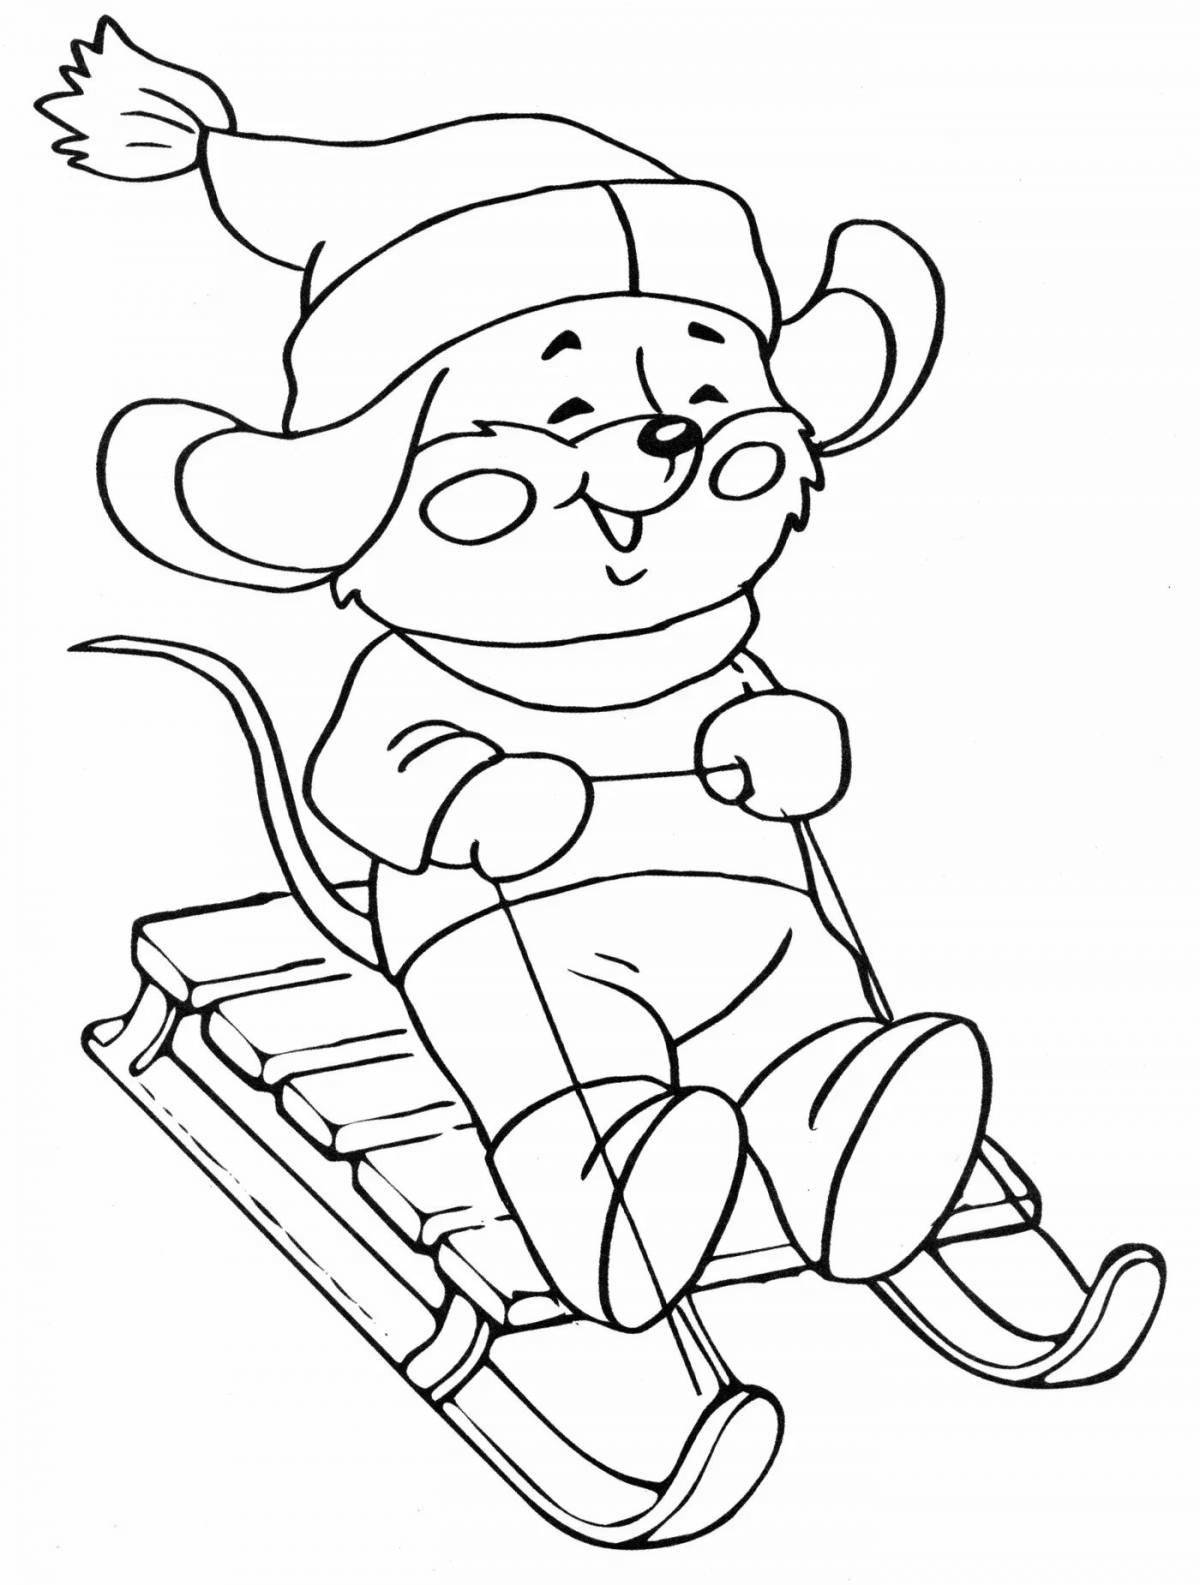 Coloring page gorgeous snowman on a sleigh